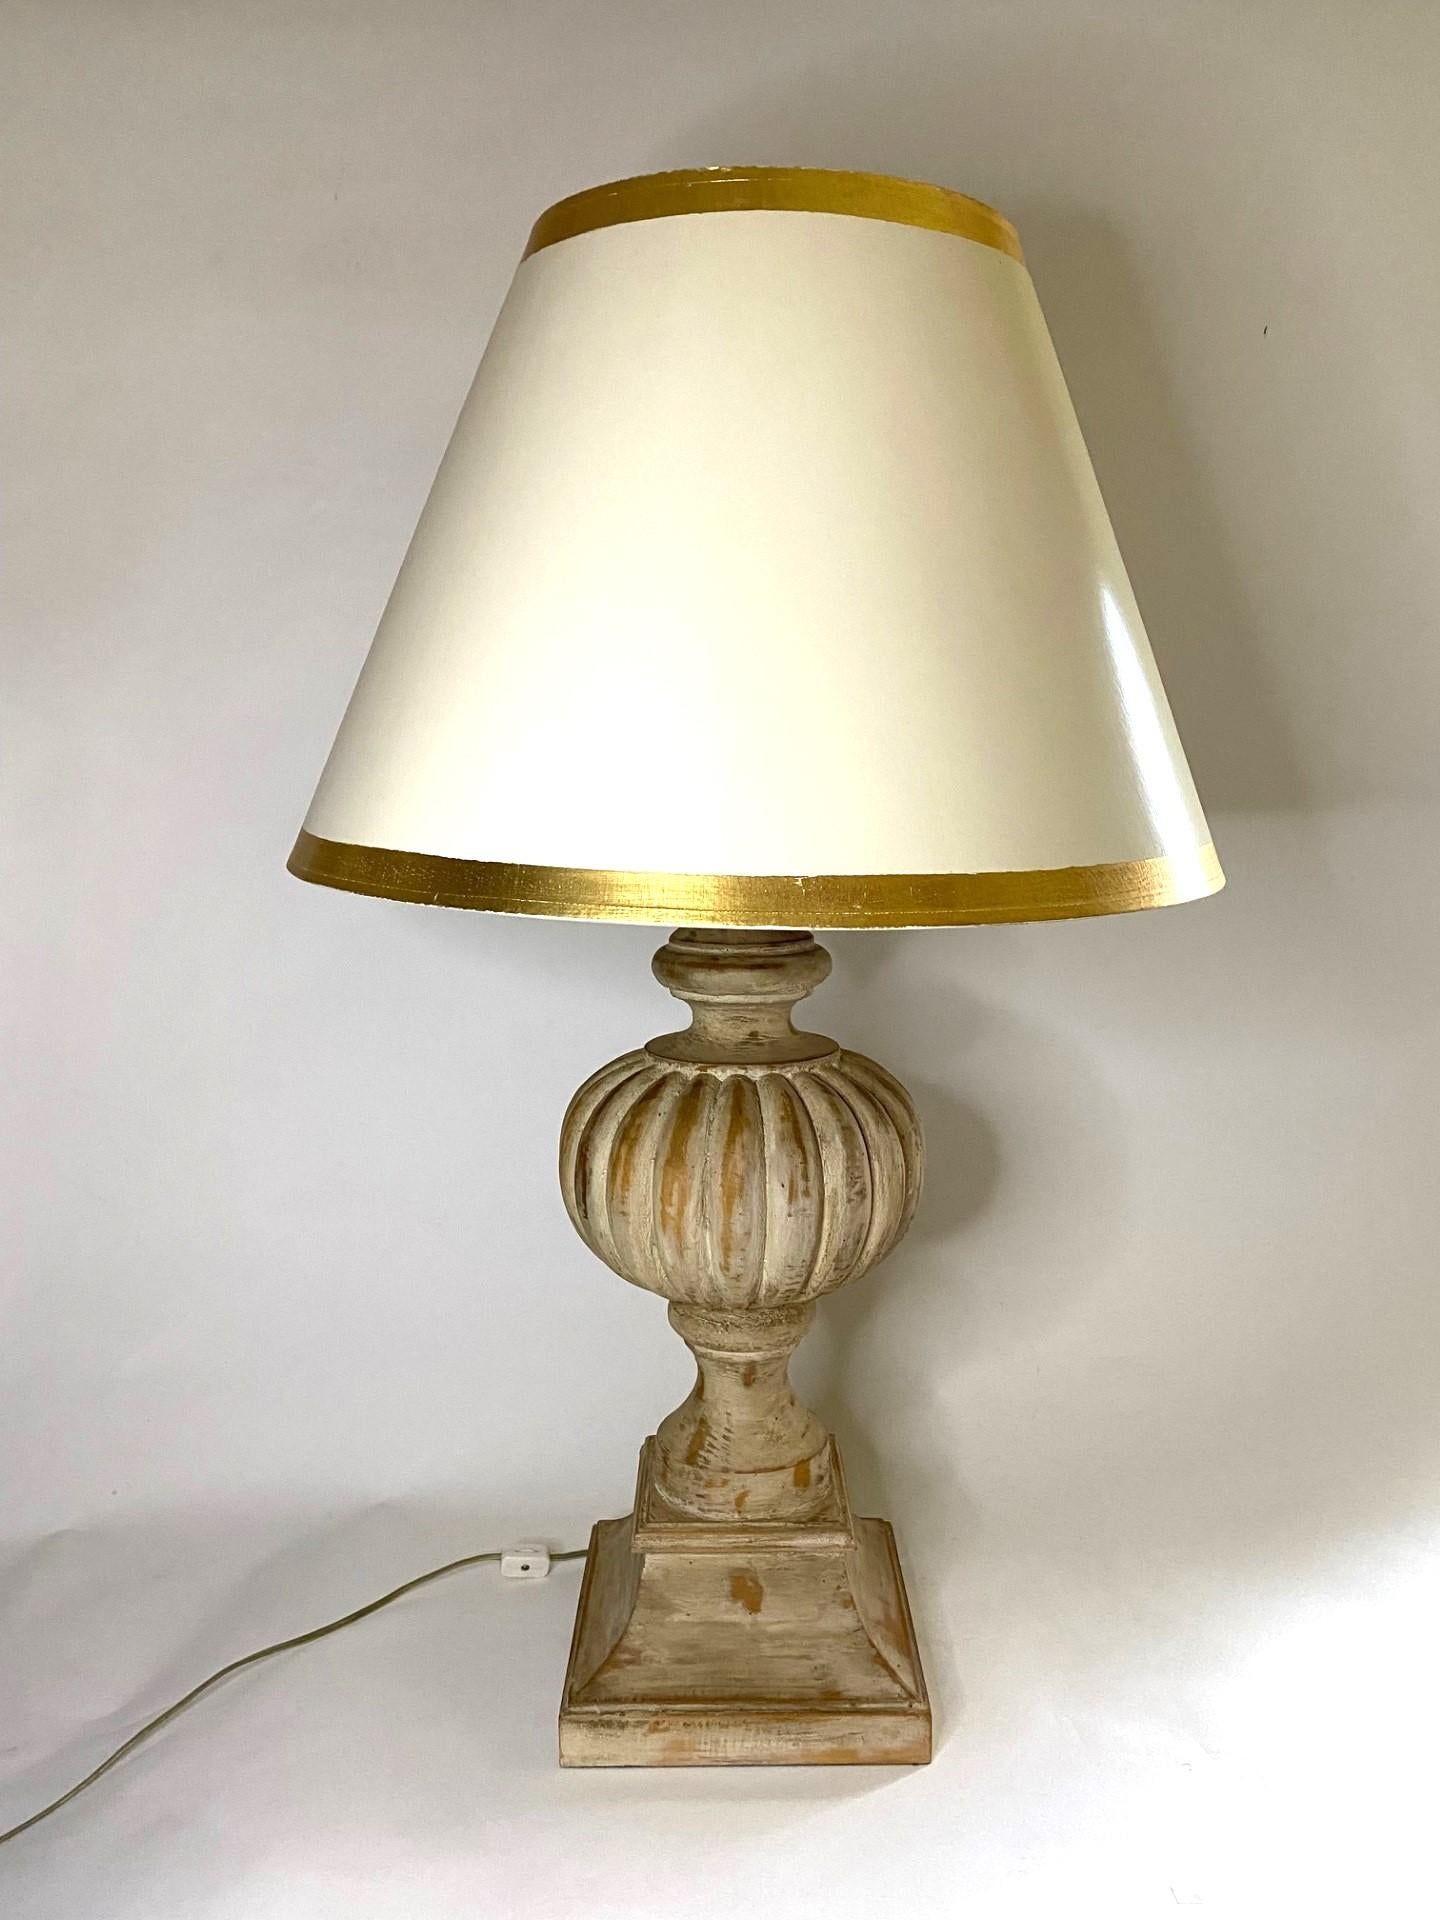 Attractive Designer Antique White Washed Carved Wood Table Lamp with White Drum Shade with Gold Trim. 